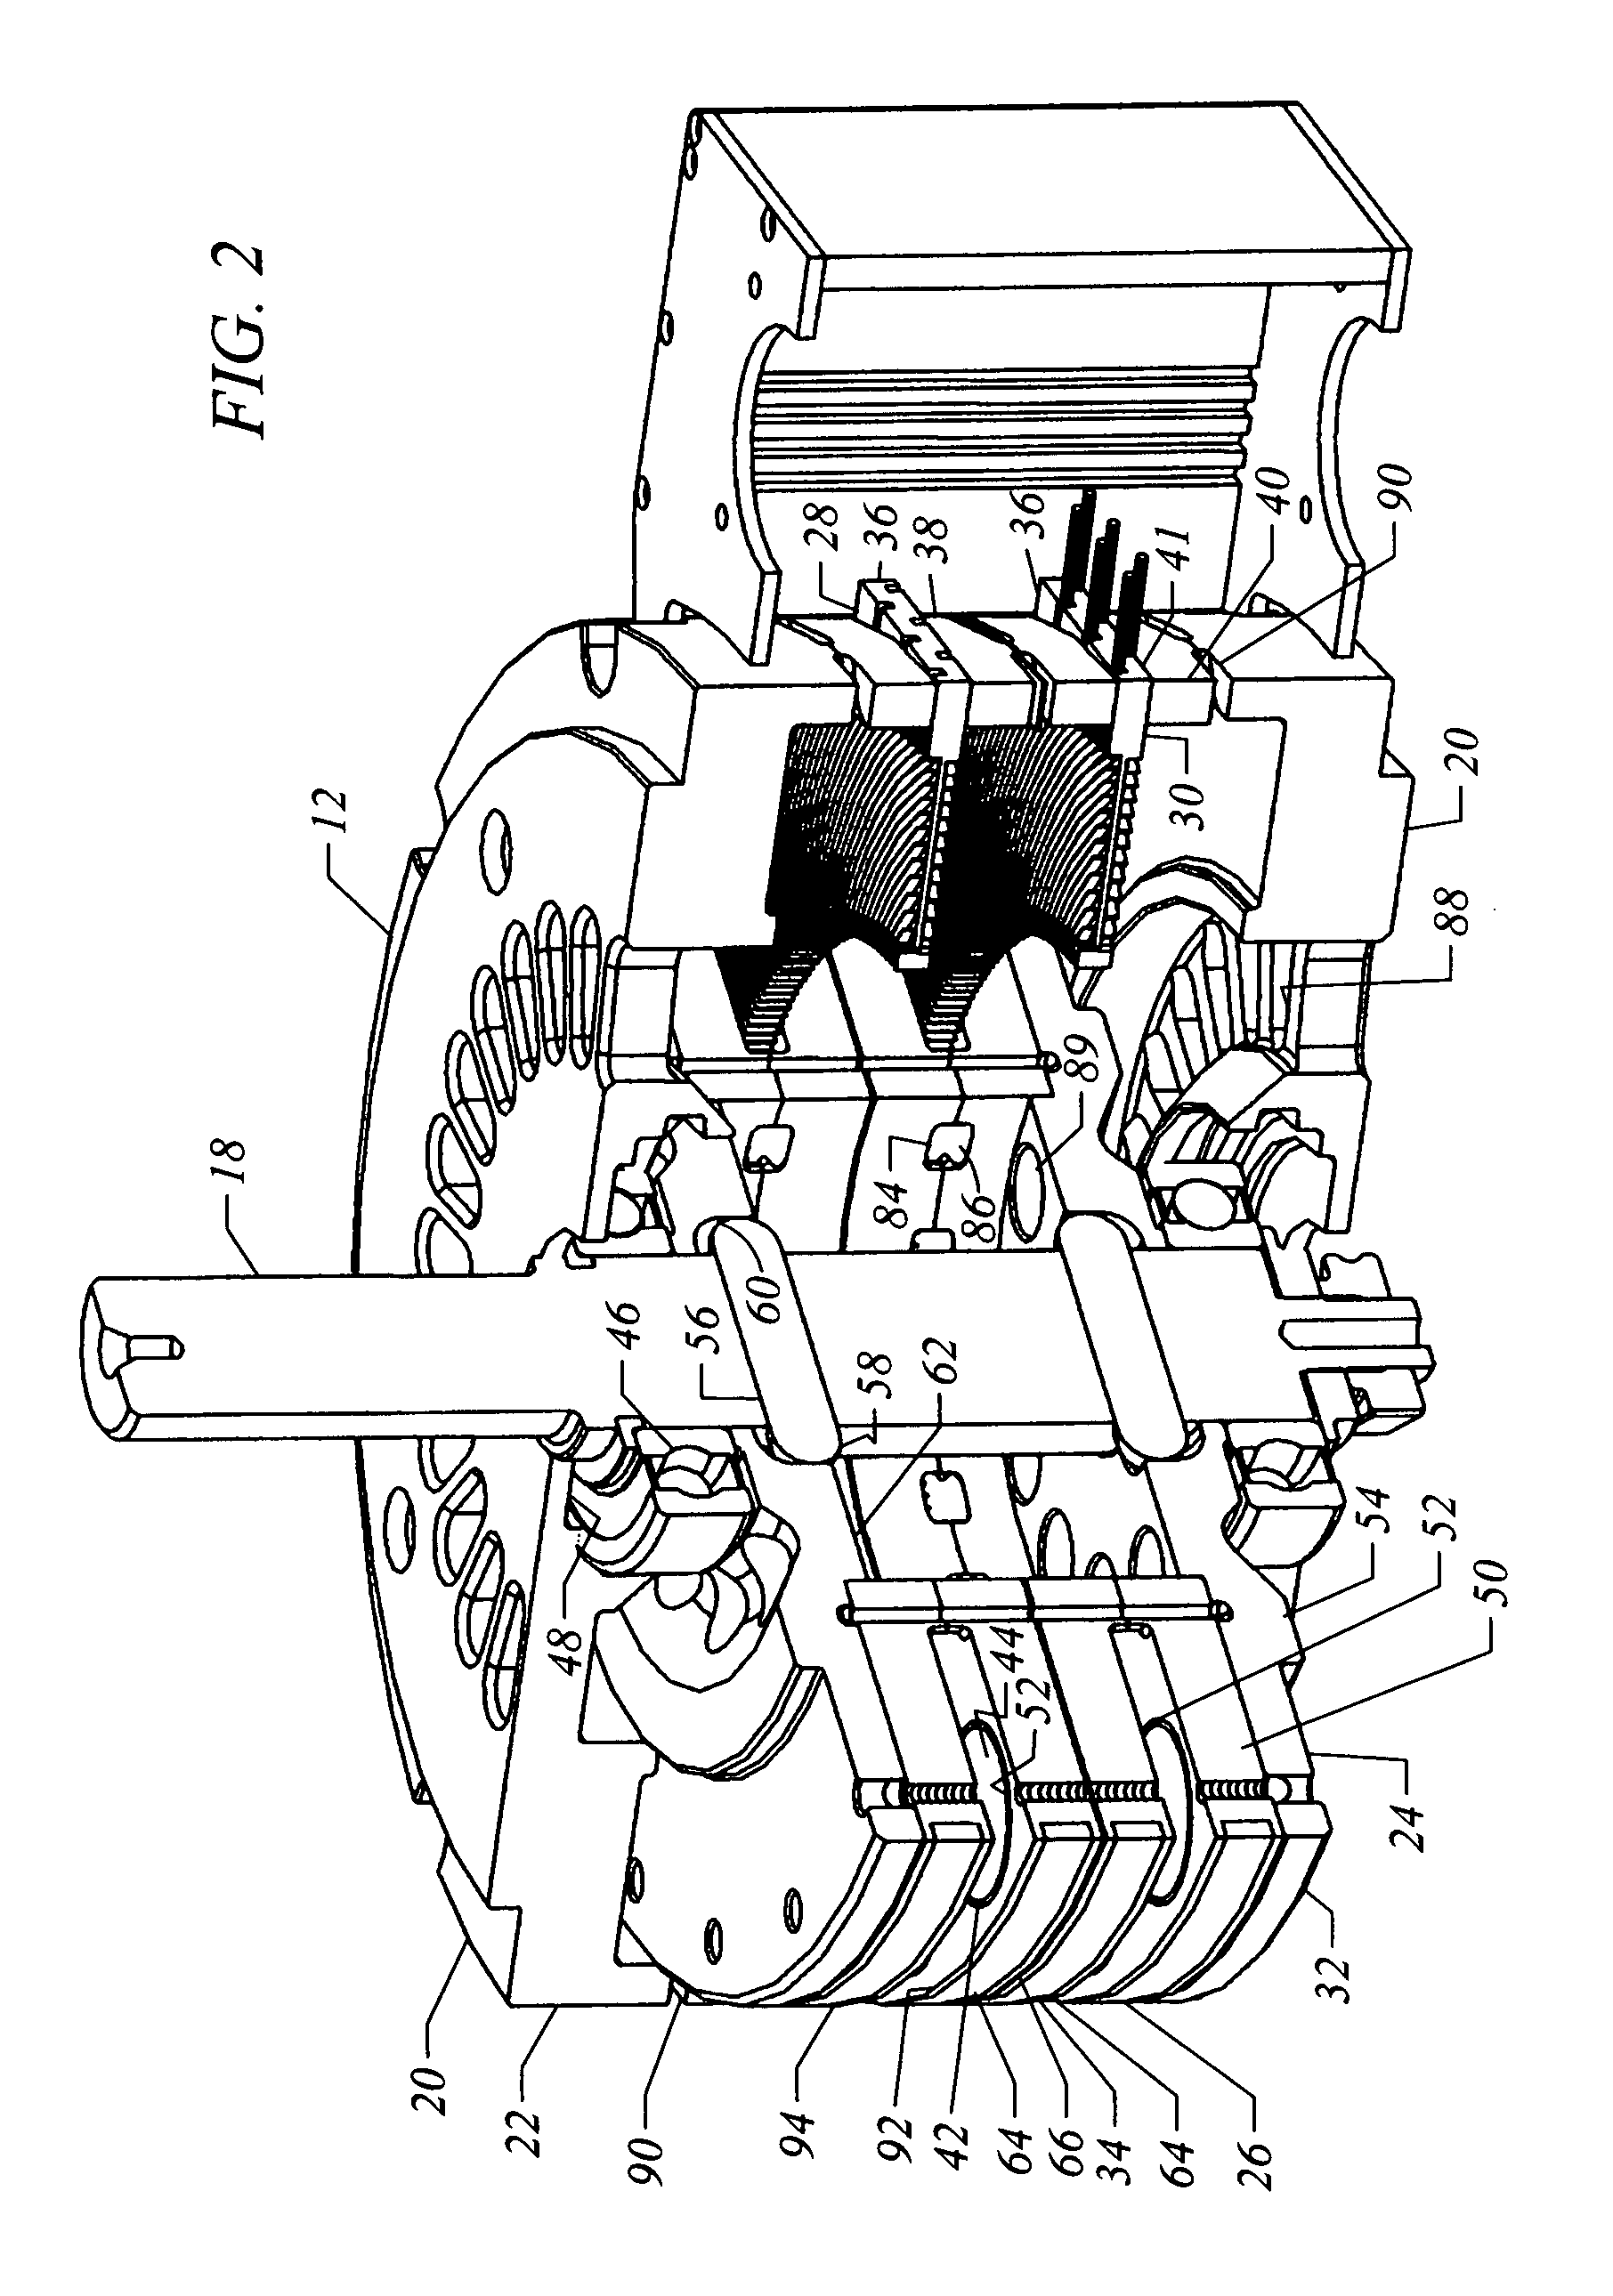 Optimized modular electrical machine using permanent magnets